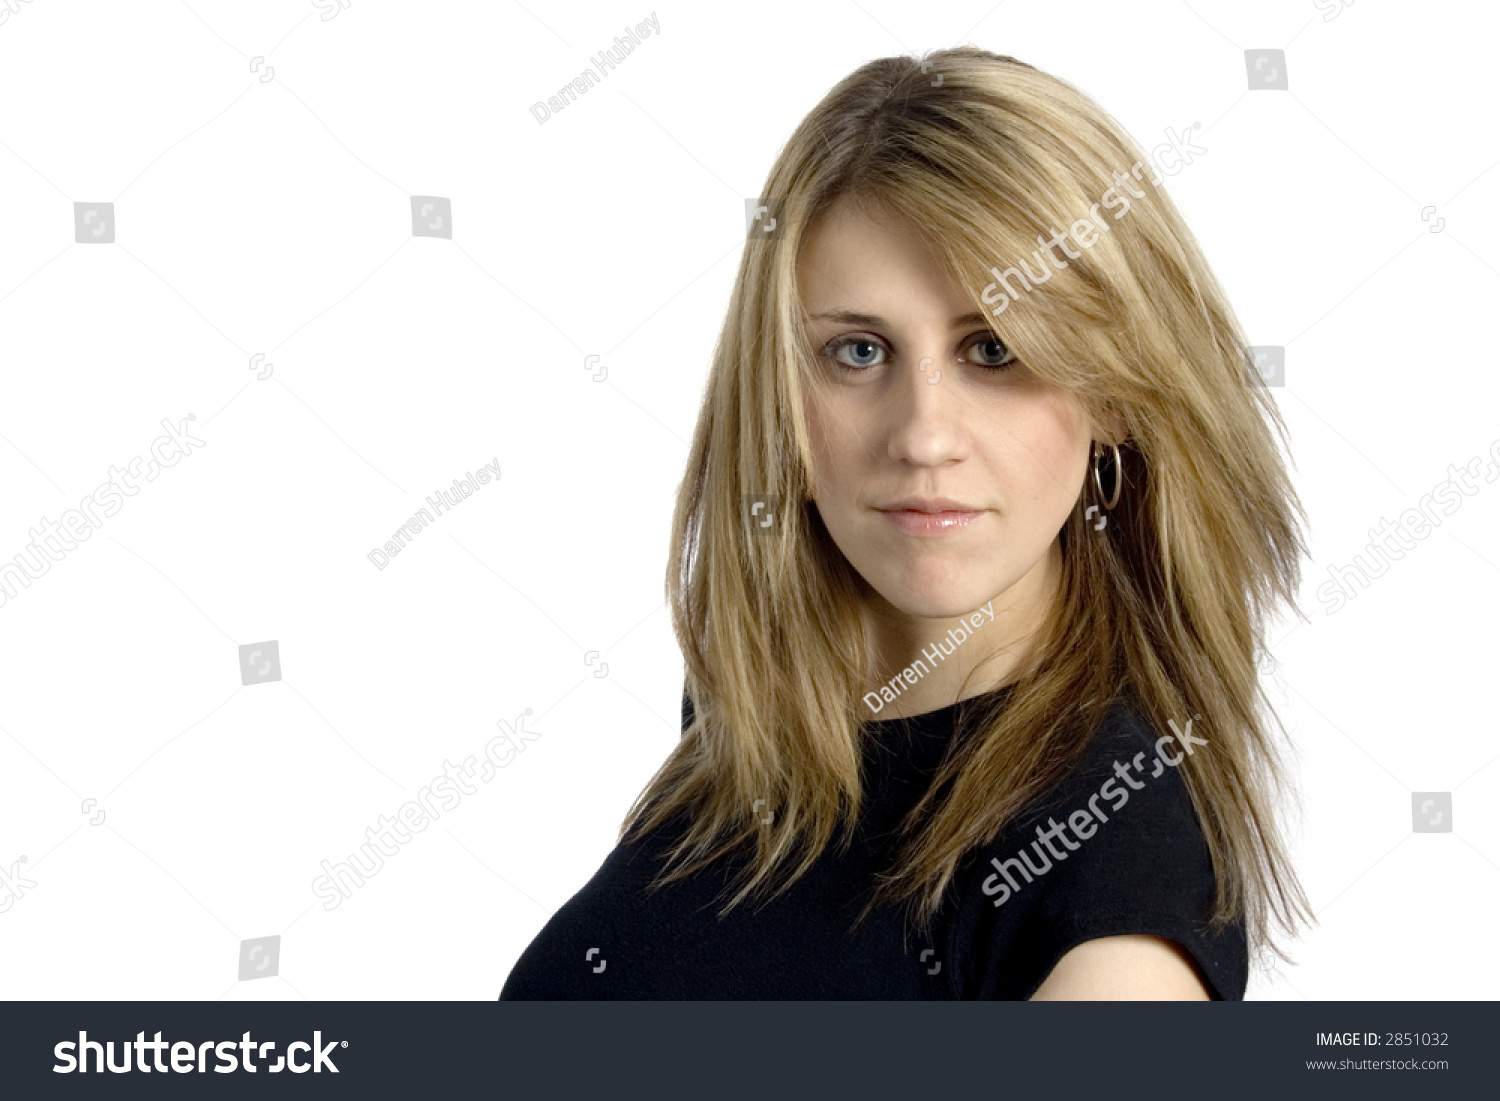 Pretty Blond Woman Tossing Her Hair And Looking Straight Forward Stock ...